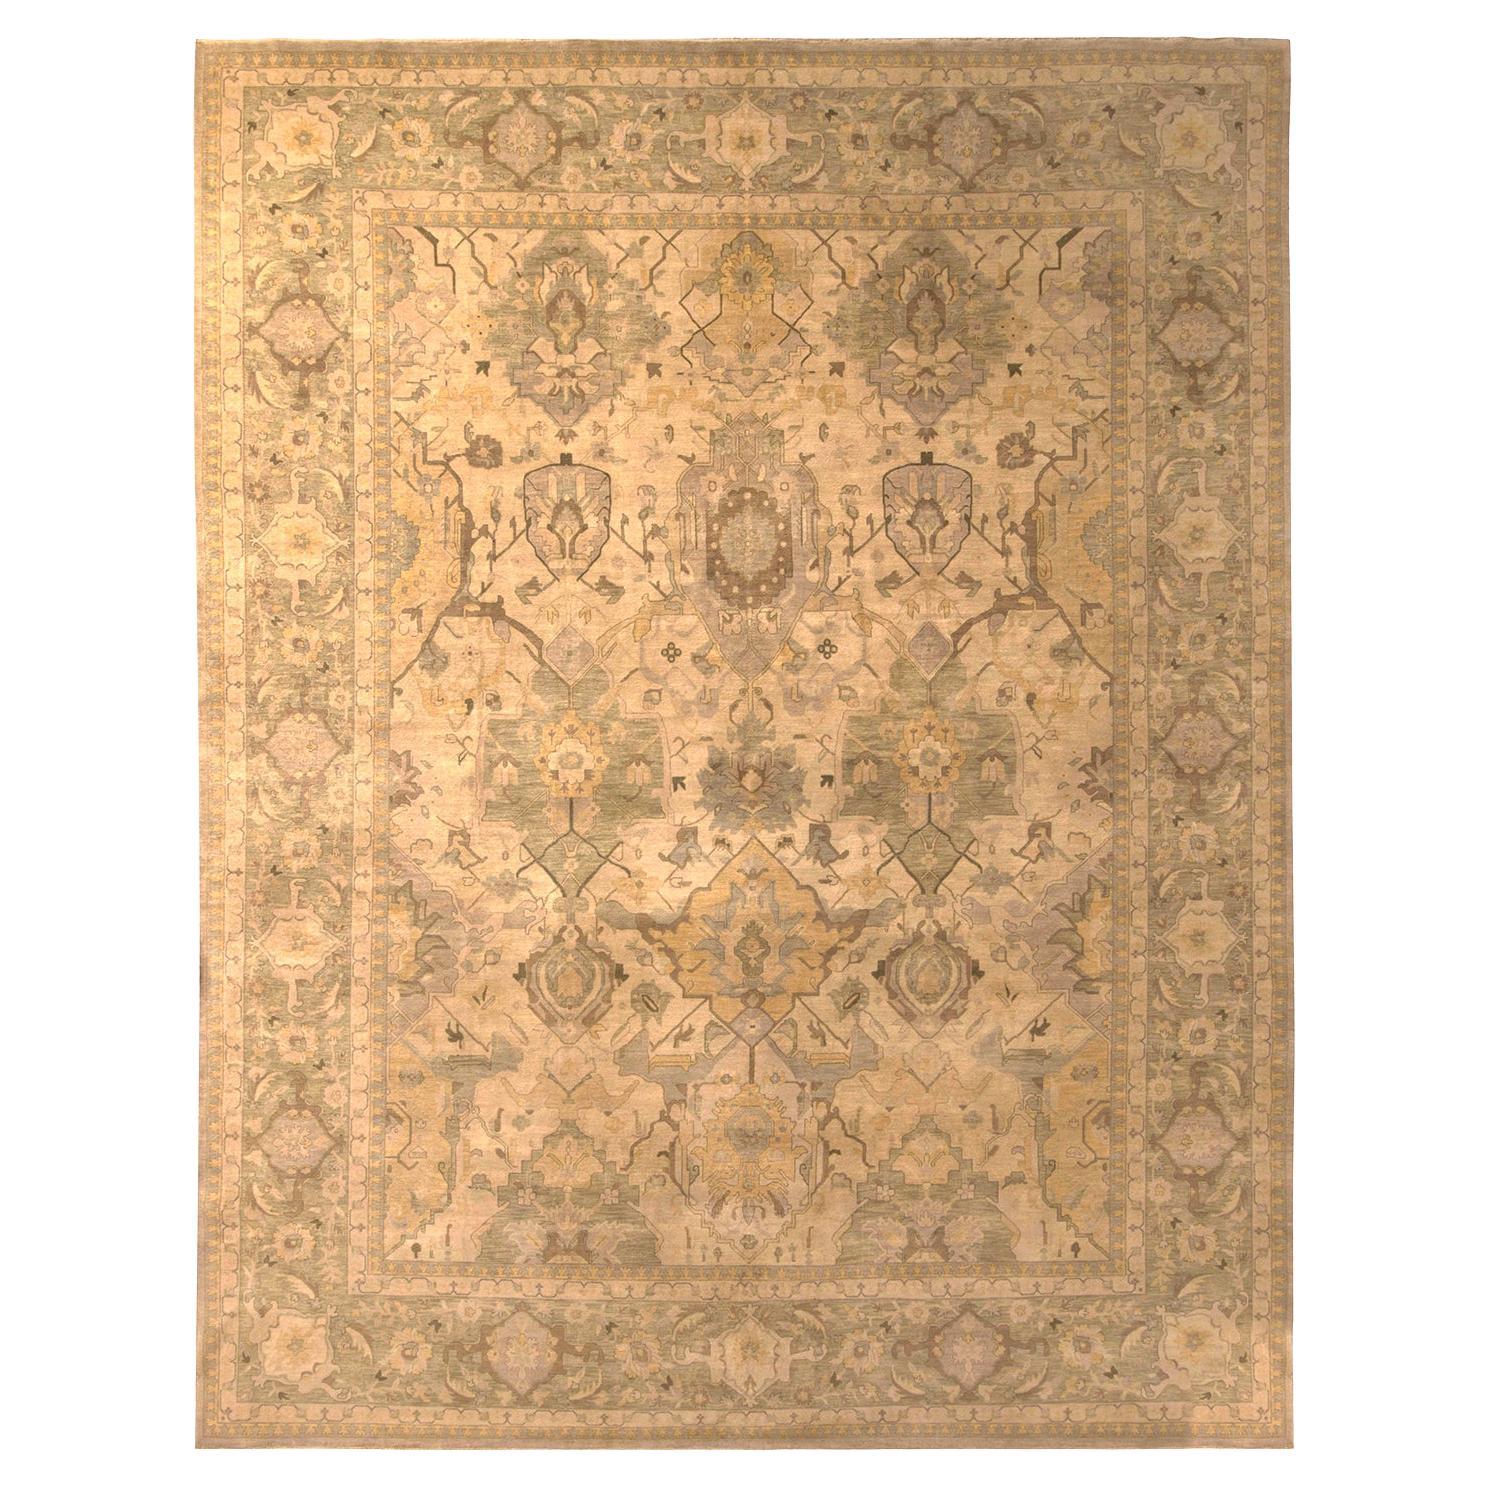 Rug & Kilim's Classic Style Rug in Cream, Pastel Green and Gold Floral Pattern For Sale